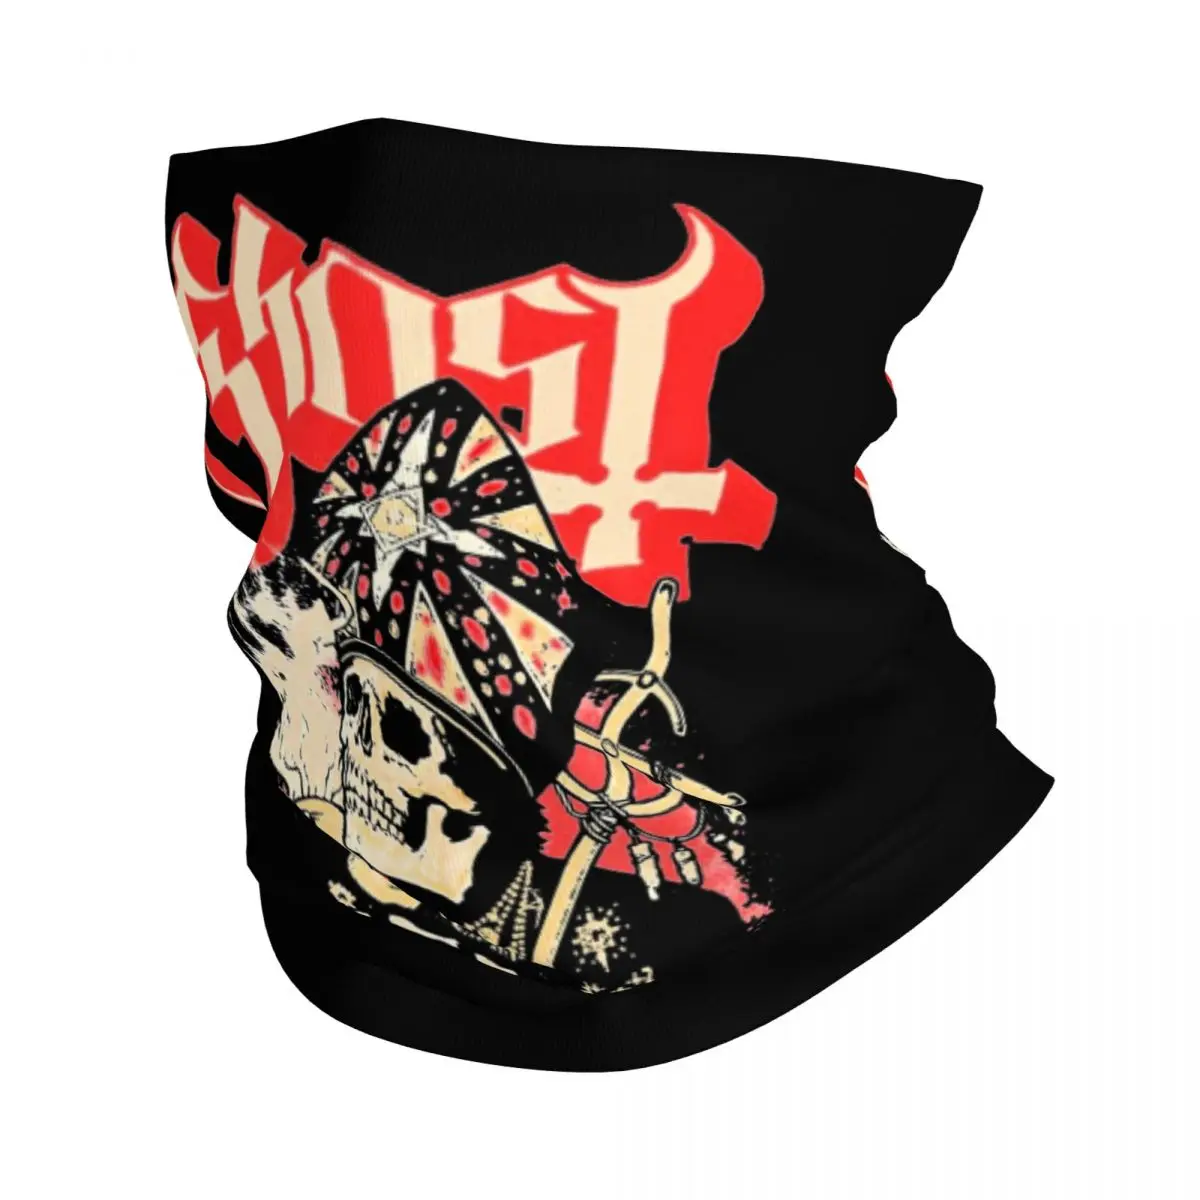 

Ghost Music Bandana Neck Gaiter Printed Rock Face Scarf Warm Face Mask Outdoor Sports for Men Women Adult Breathable